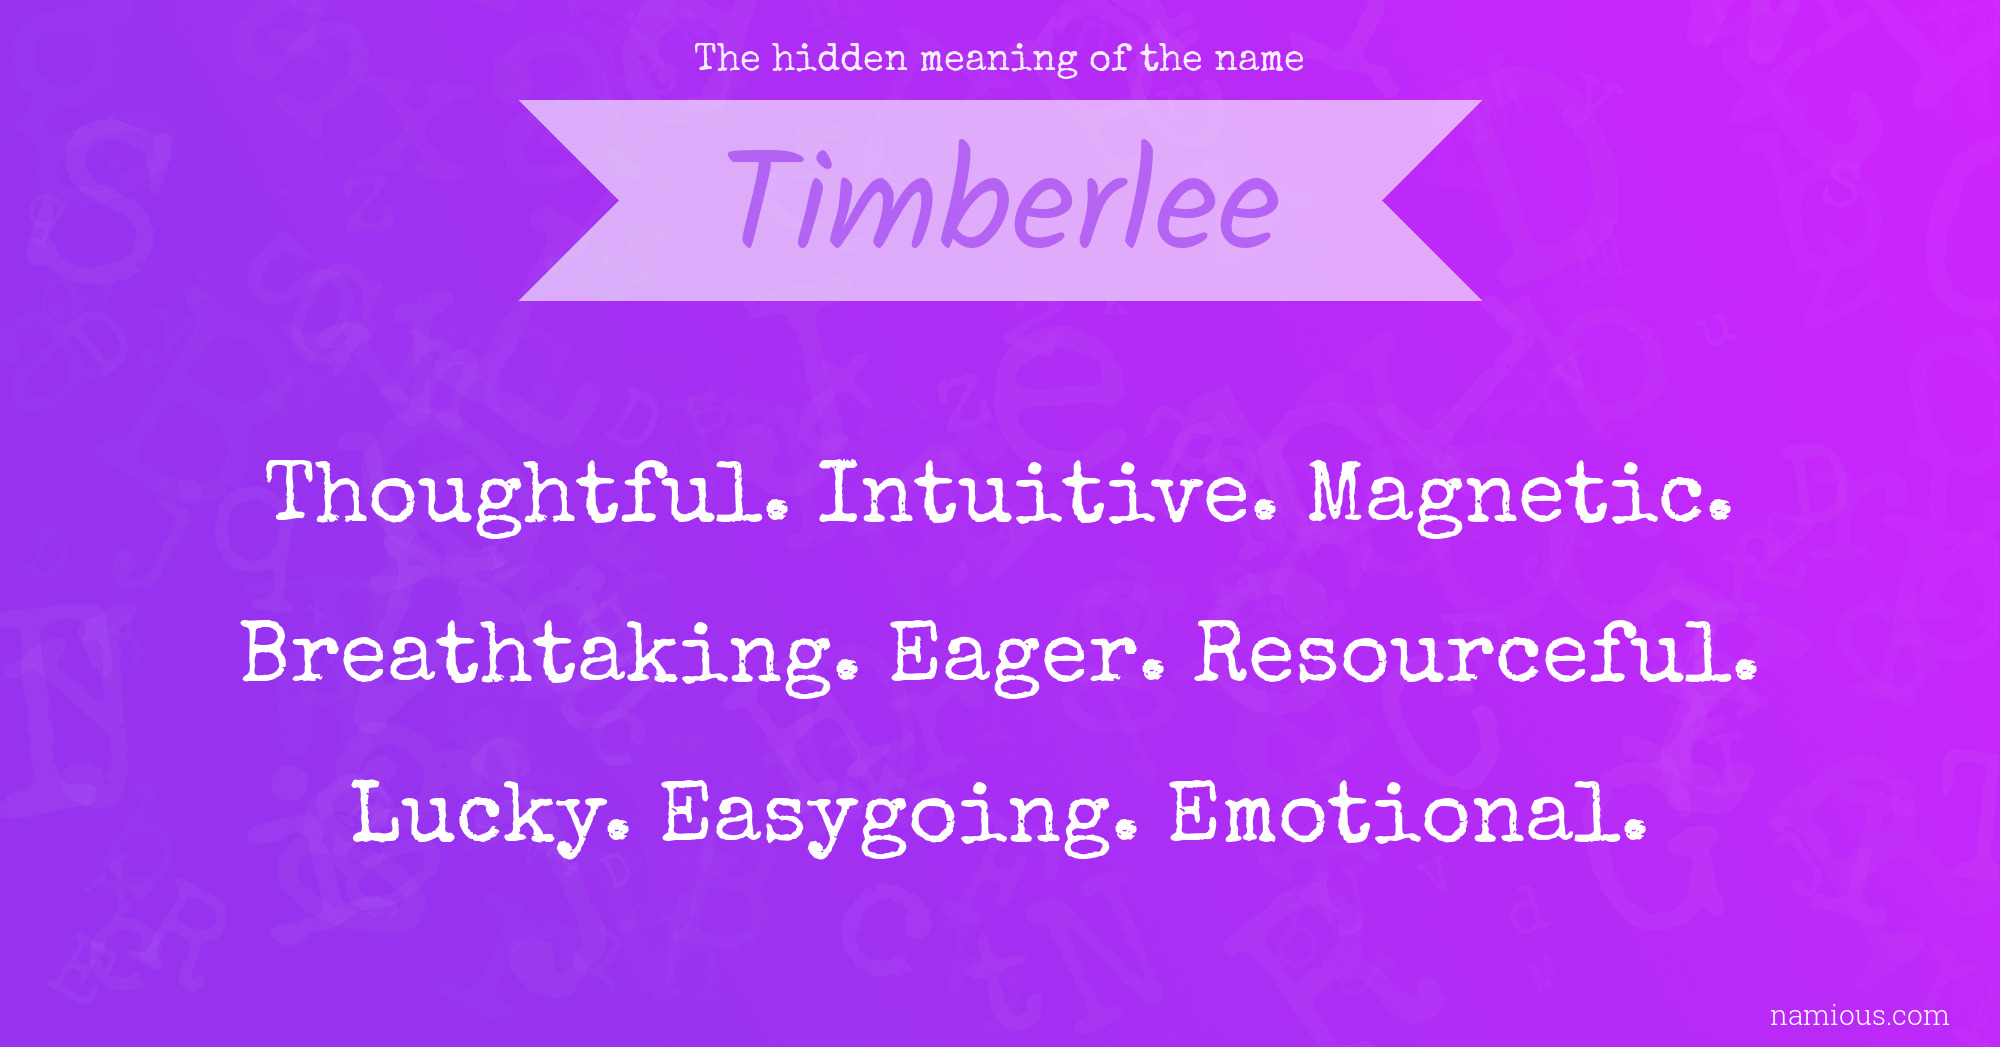 The hidden meaning of the name Timberlee